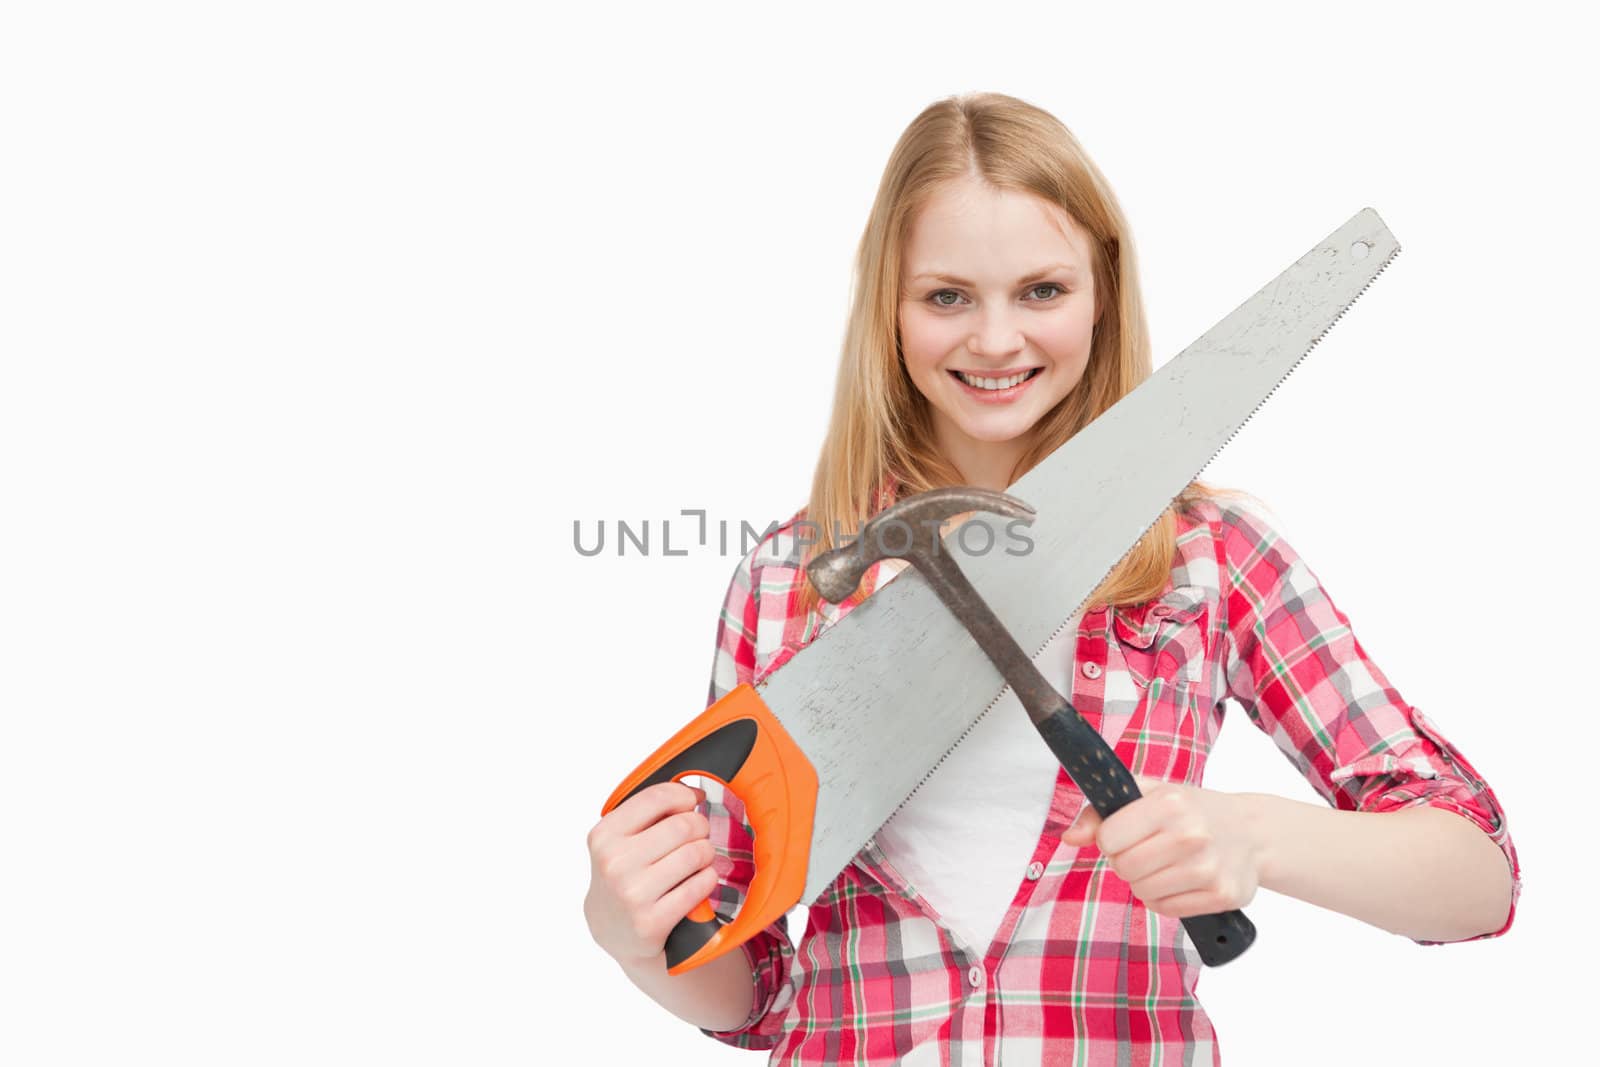 Woman holding a hammer and a saw against white background